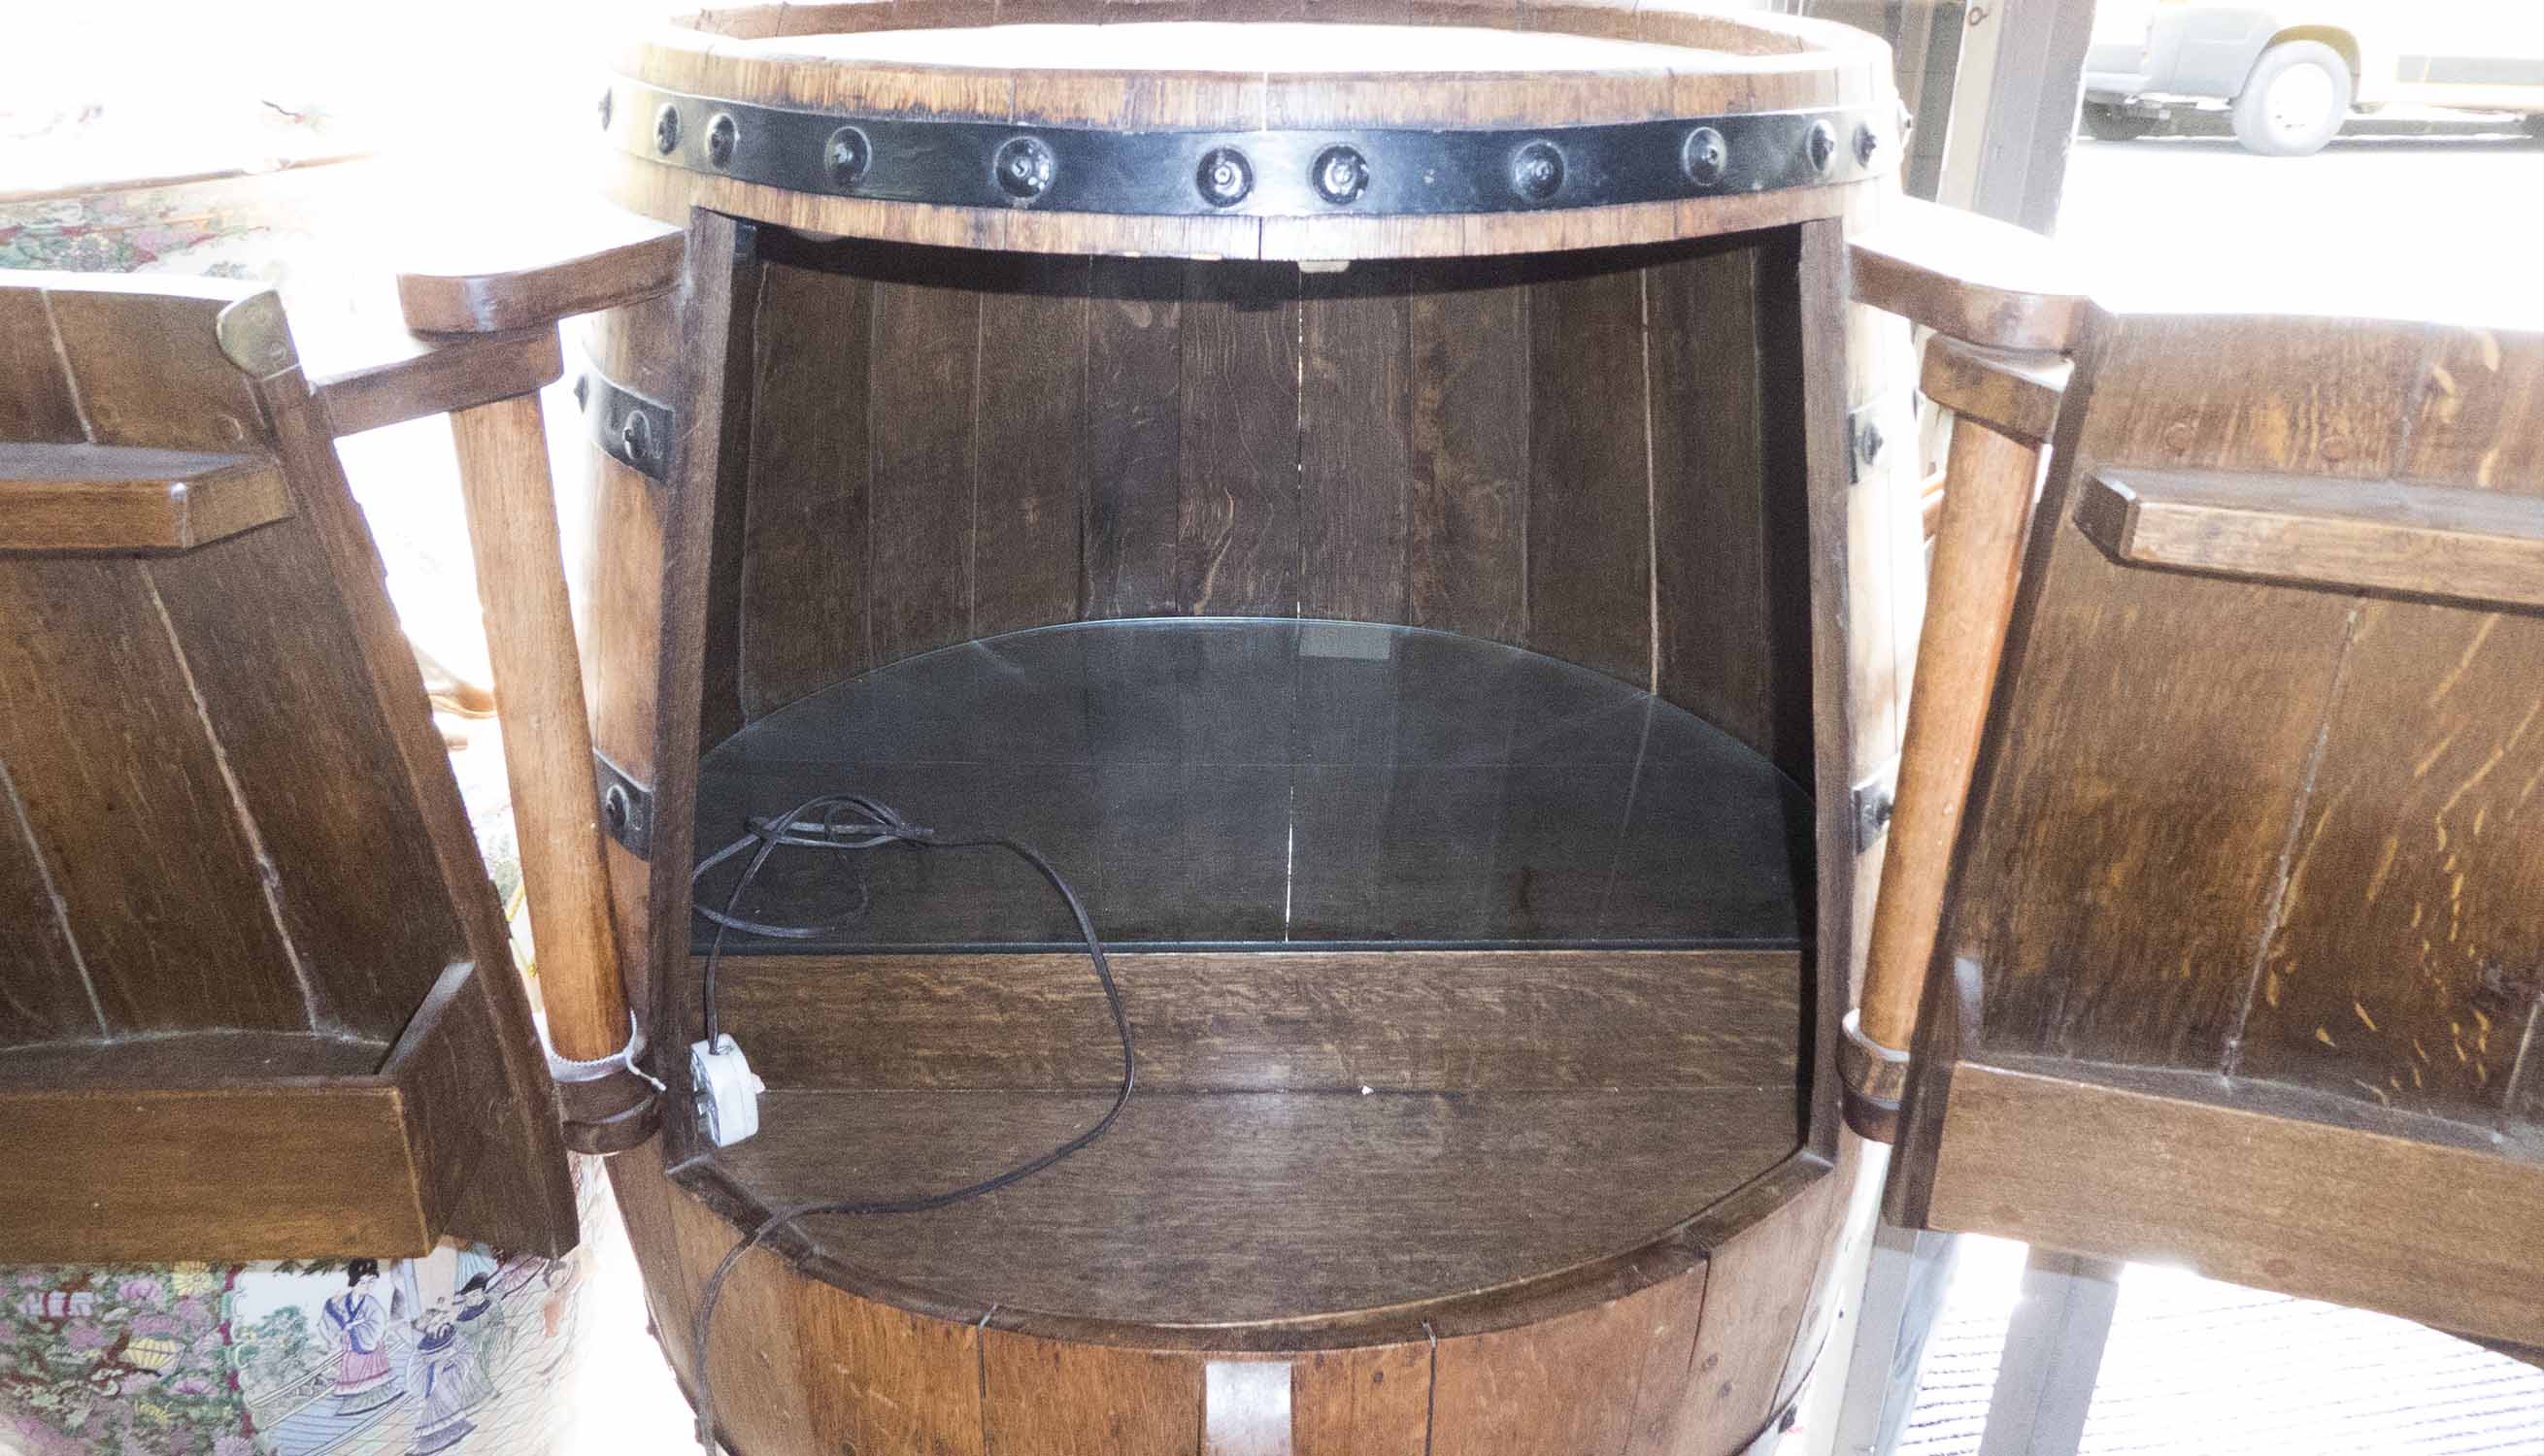 WINE BARREL BAR, with central opening compartment with light up interior, 101cm H x 60cm diam. - Image 3 of 3